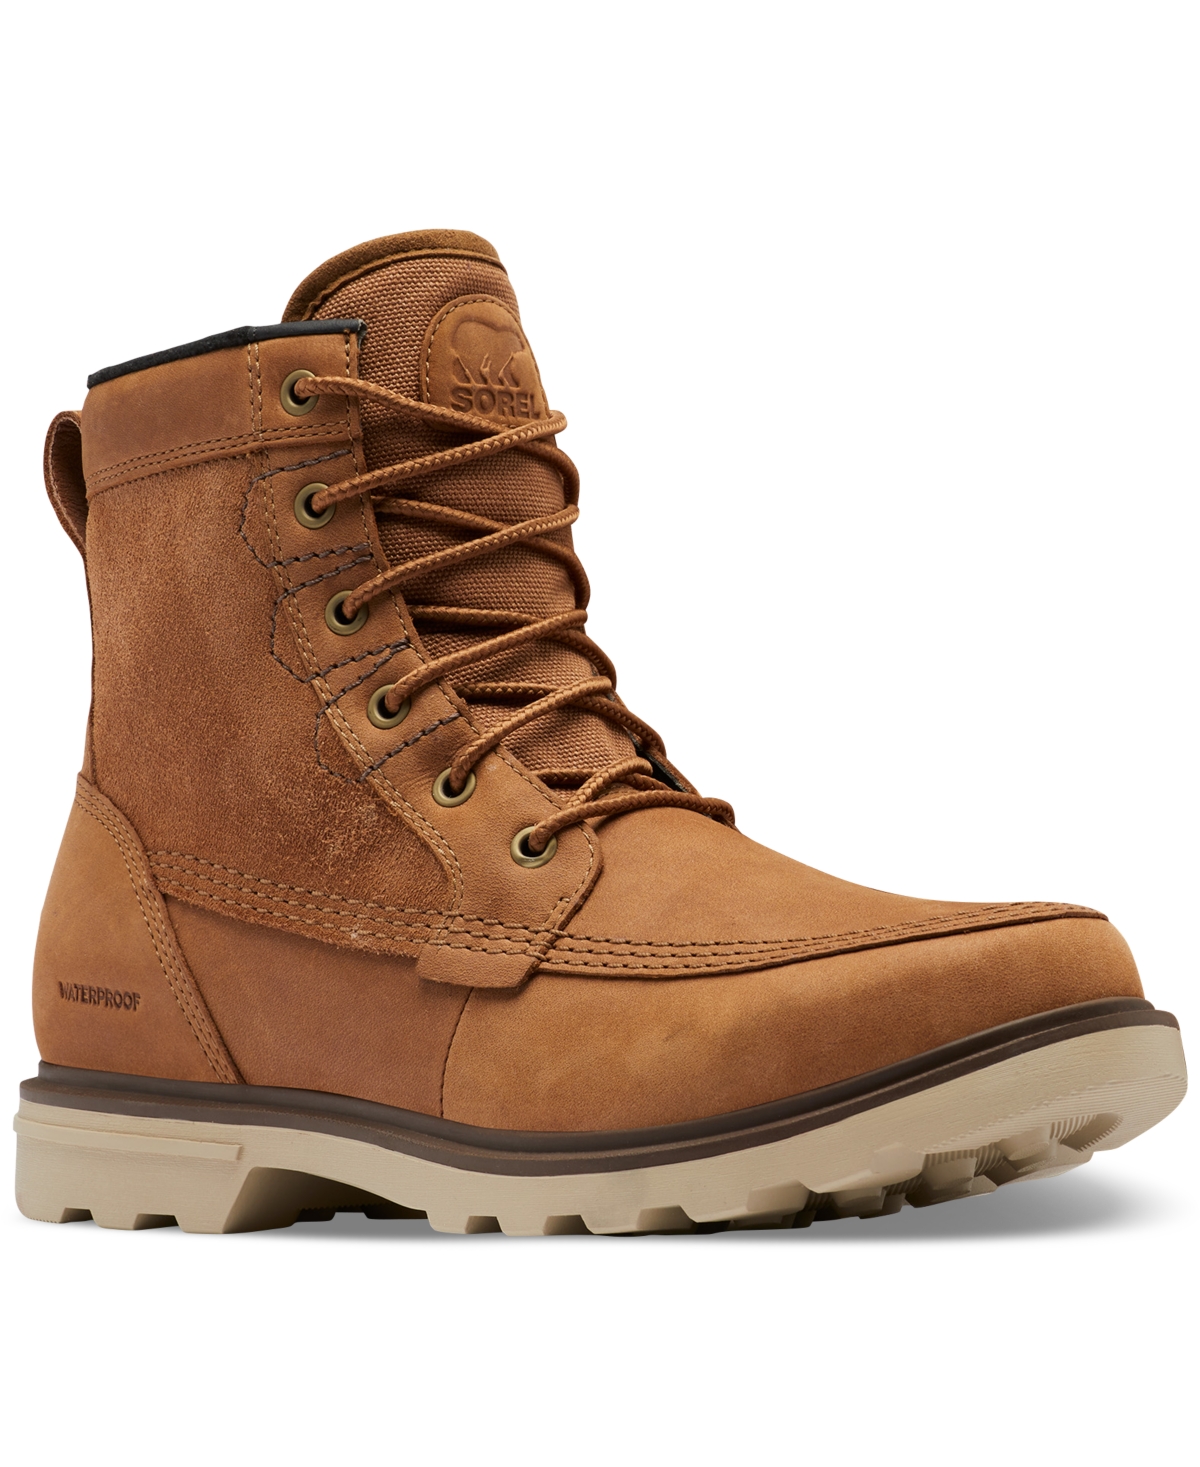 Men's Carson Storm Waterproof Insulated Boot - Camel Brown, Oatmeal